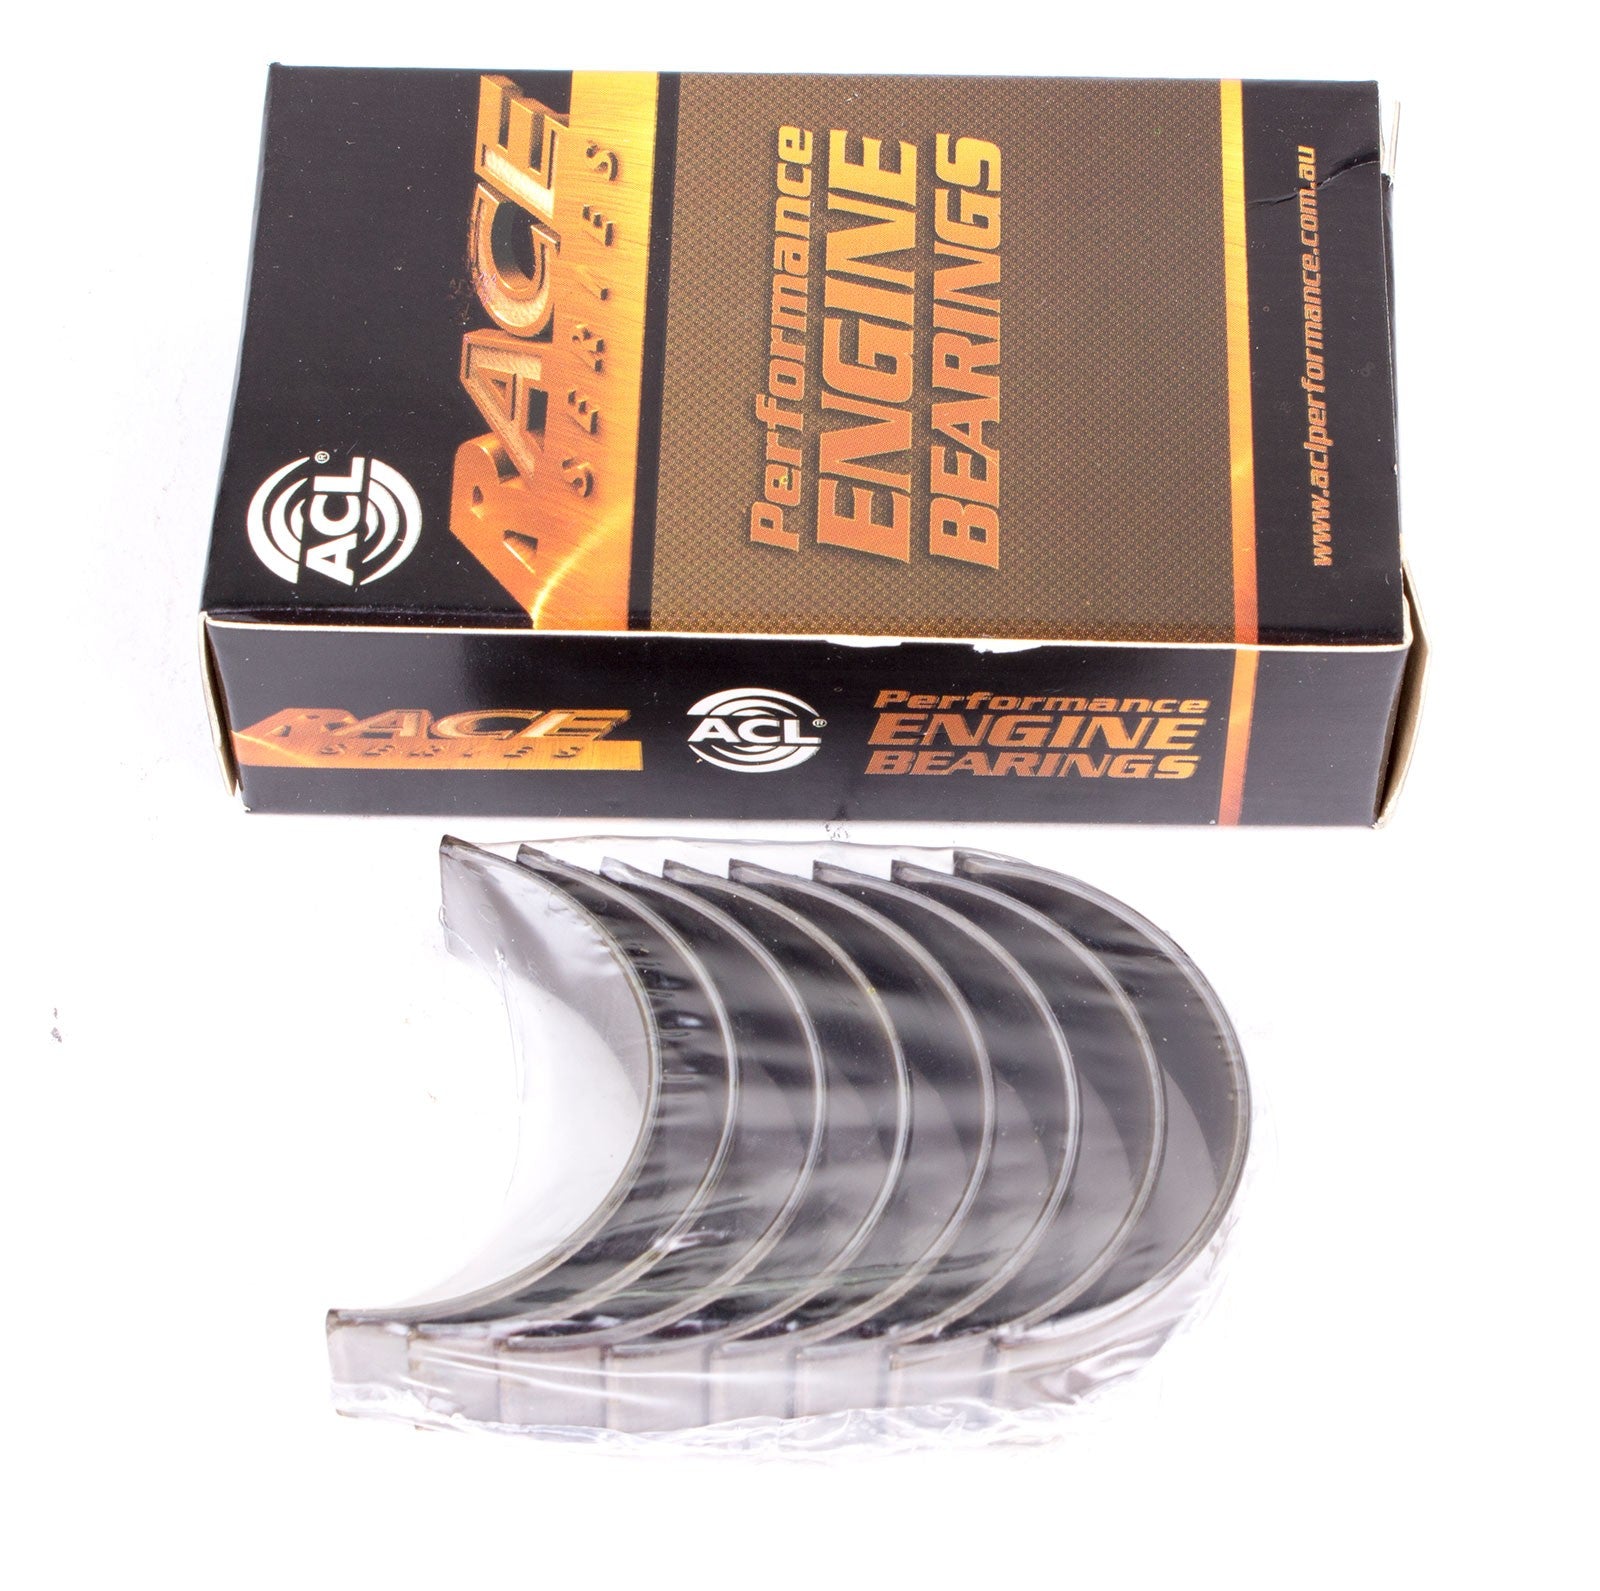 ACL 5M909H-01 Main bearing set (ACL Race Series) Photo-0 